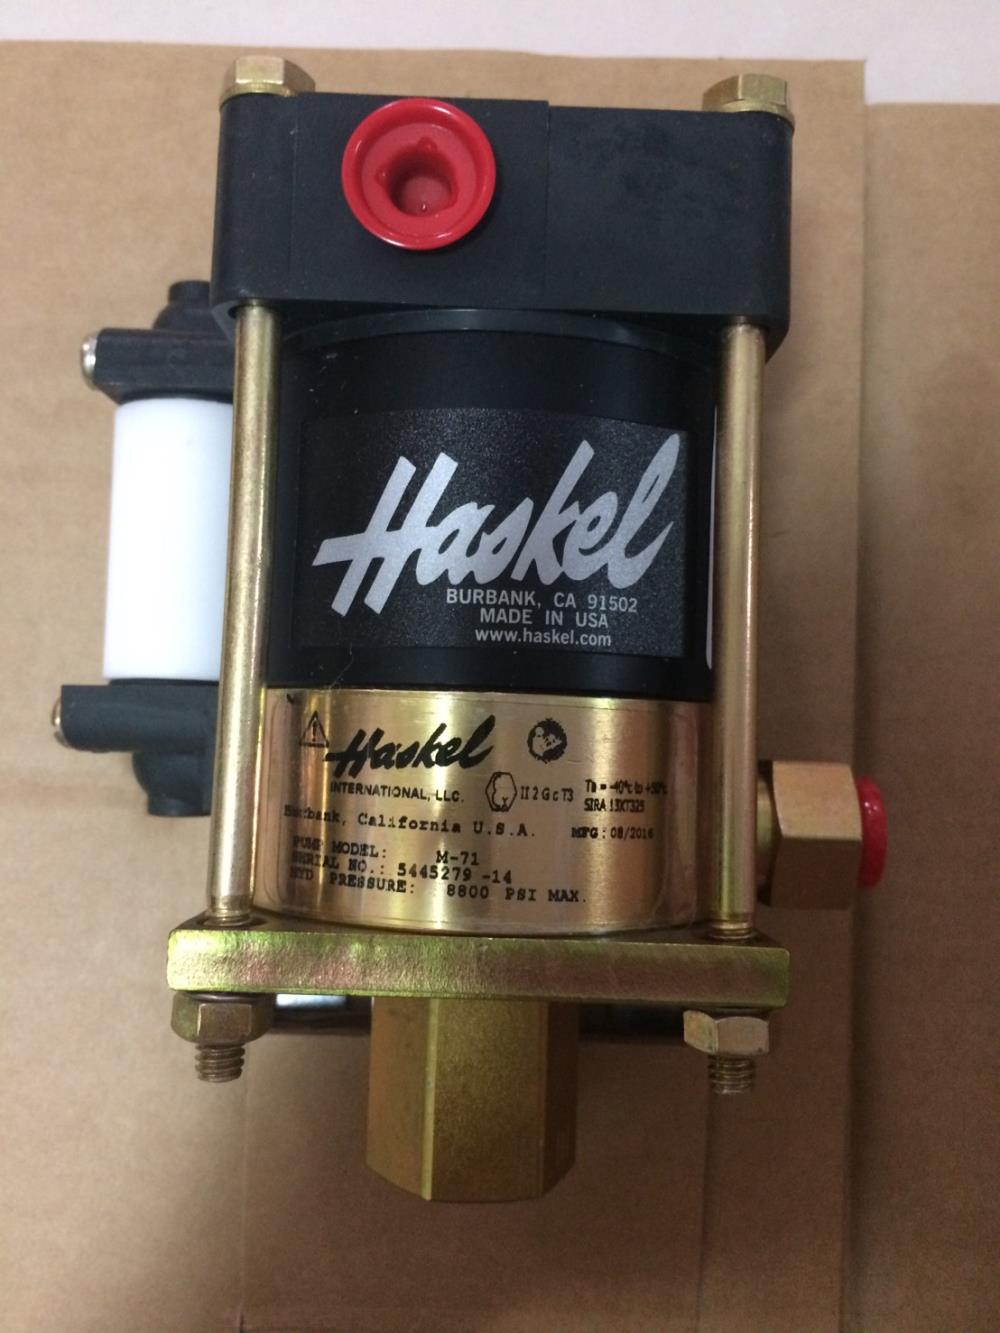 "HASKEL" M-71 ป??มแรงดันสูง,"HASKEL" M-71 ป??มแรงดันสูง,"HASKEL" M-71 ป??มแรงดันสูง,Pumps, Valves and Accessories/Tubes and Tubing